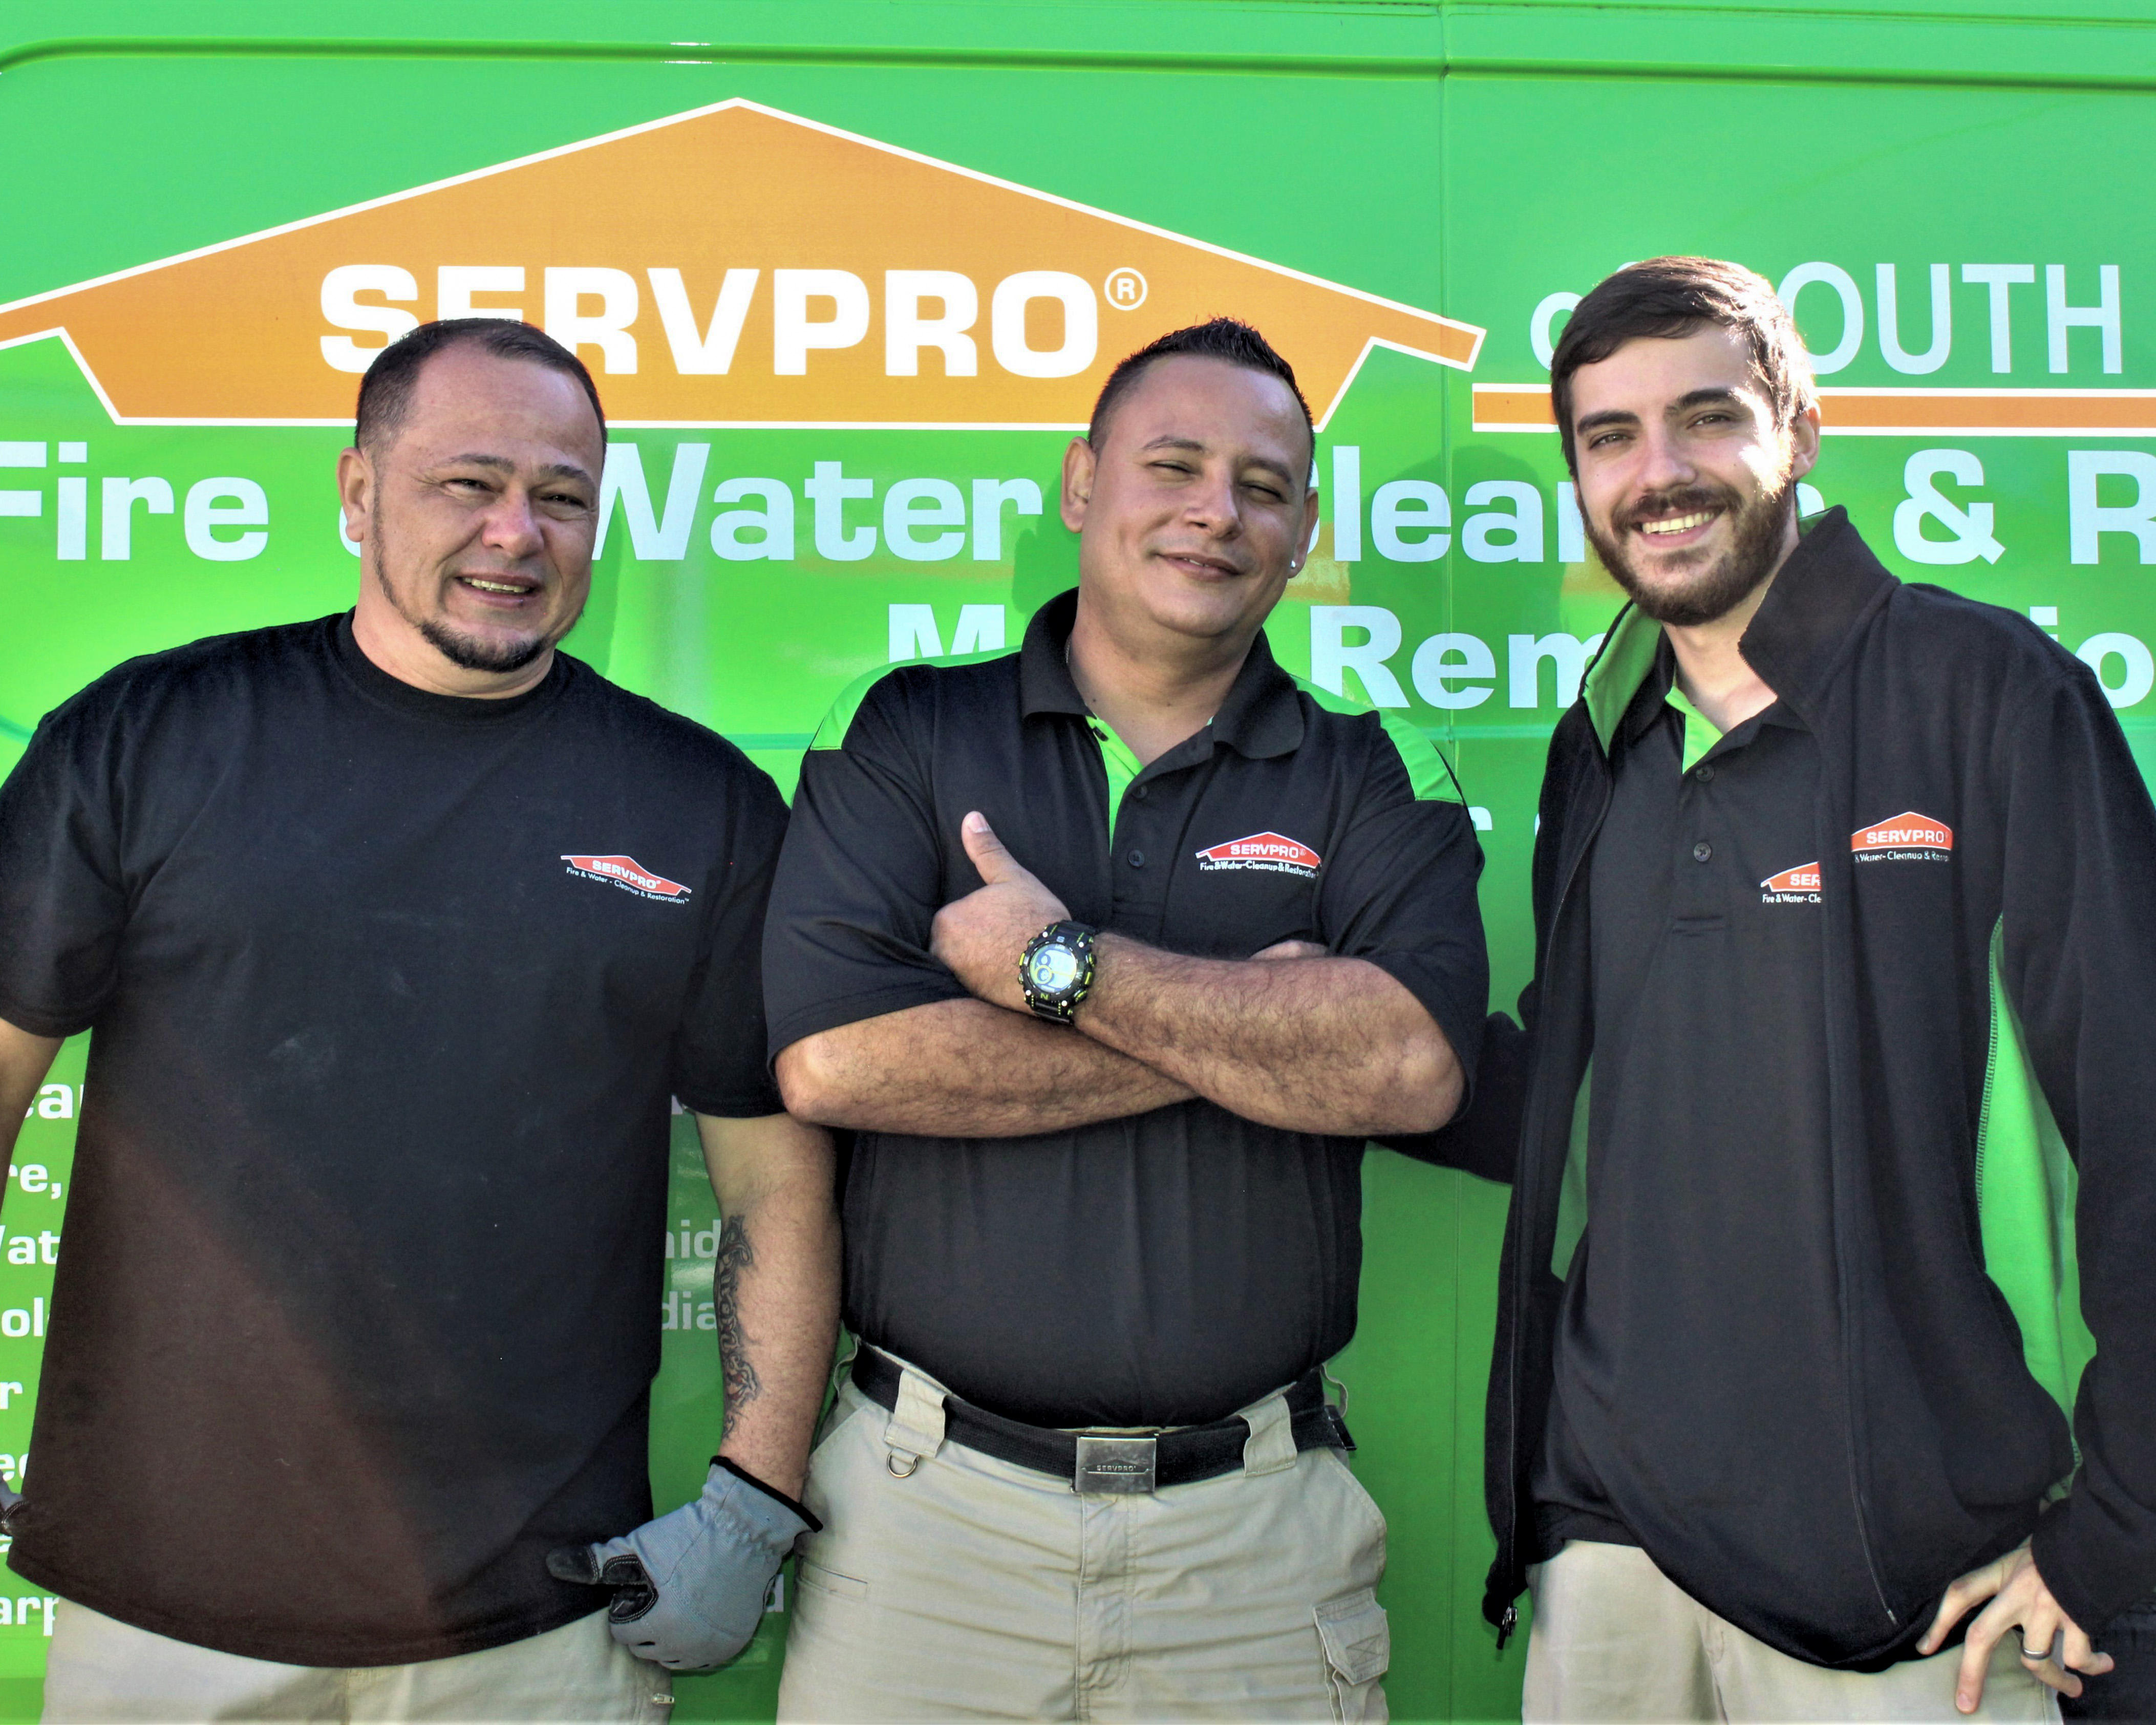 Our team at SERVPRO of Delray Beach specializes in water, fire, and mold restoration.